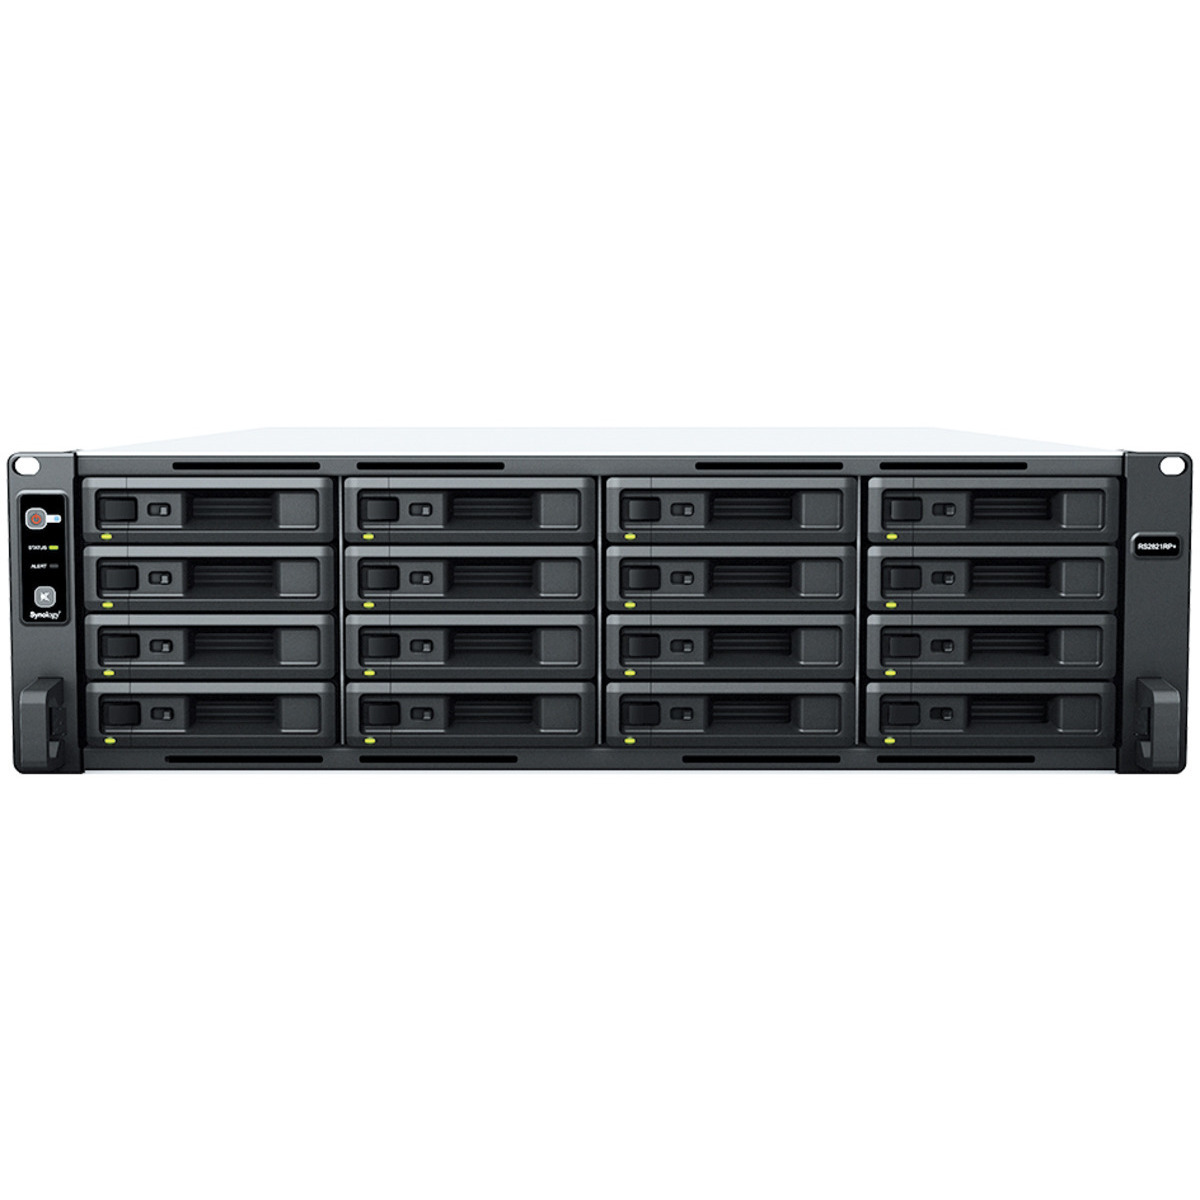 Synology RackStation RS2821RP+ 64tb 16-Bay RackMount Large Business / Enterprise NAS - Network Attached Storage Device 16x4tb Seagate BarraCuda ST4000DM004 3.5 7200rpm SATA 6Gb/s HDD CONSUMER Class Drives Installed - Burn-In Tested RackStation RS2821RP+